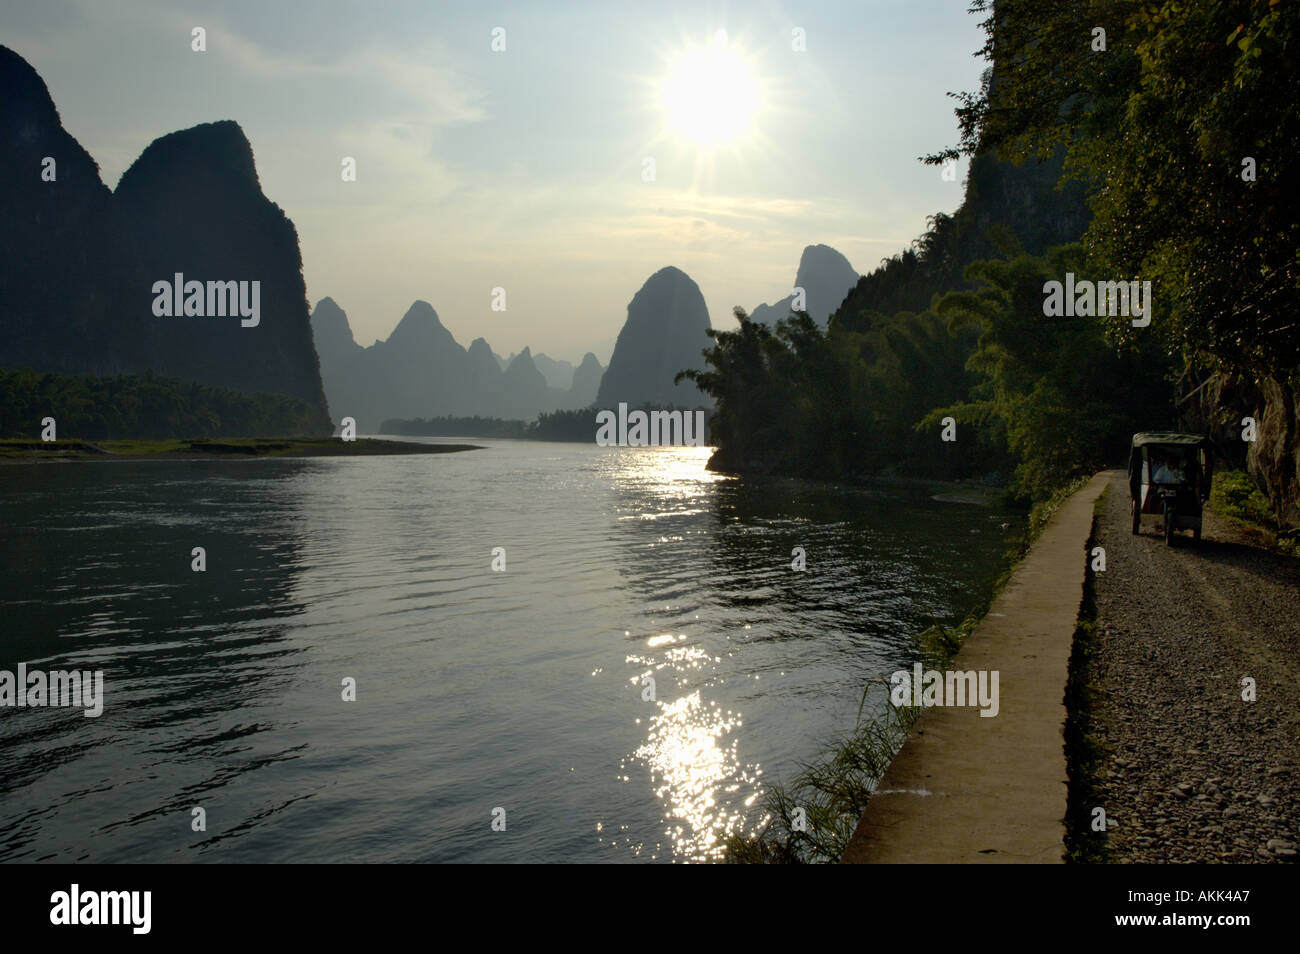 Lijiang or Li River at sunset with man in motor tricycle on the road - Yangshuo County, Guangxi, China Stock Photo